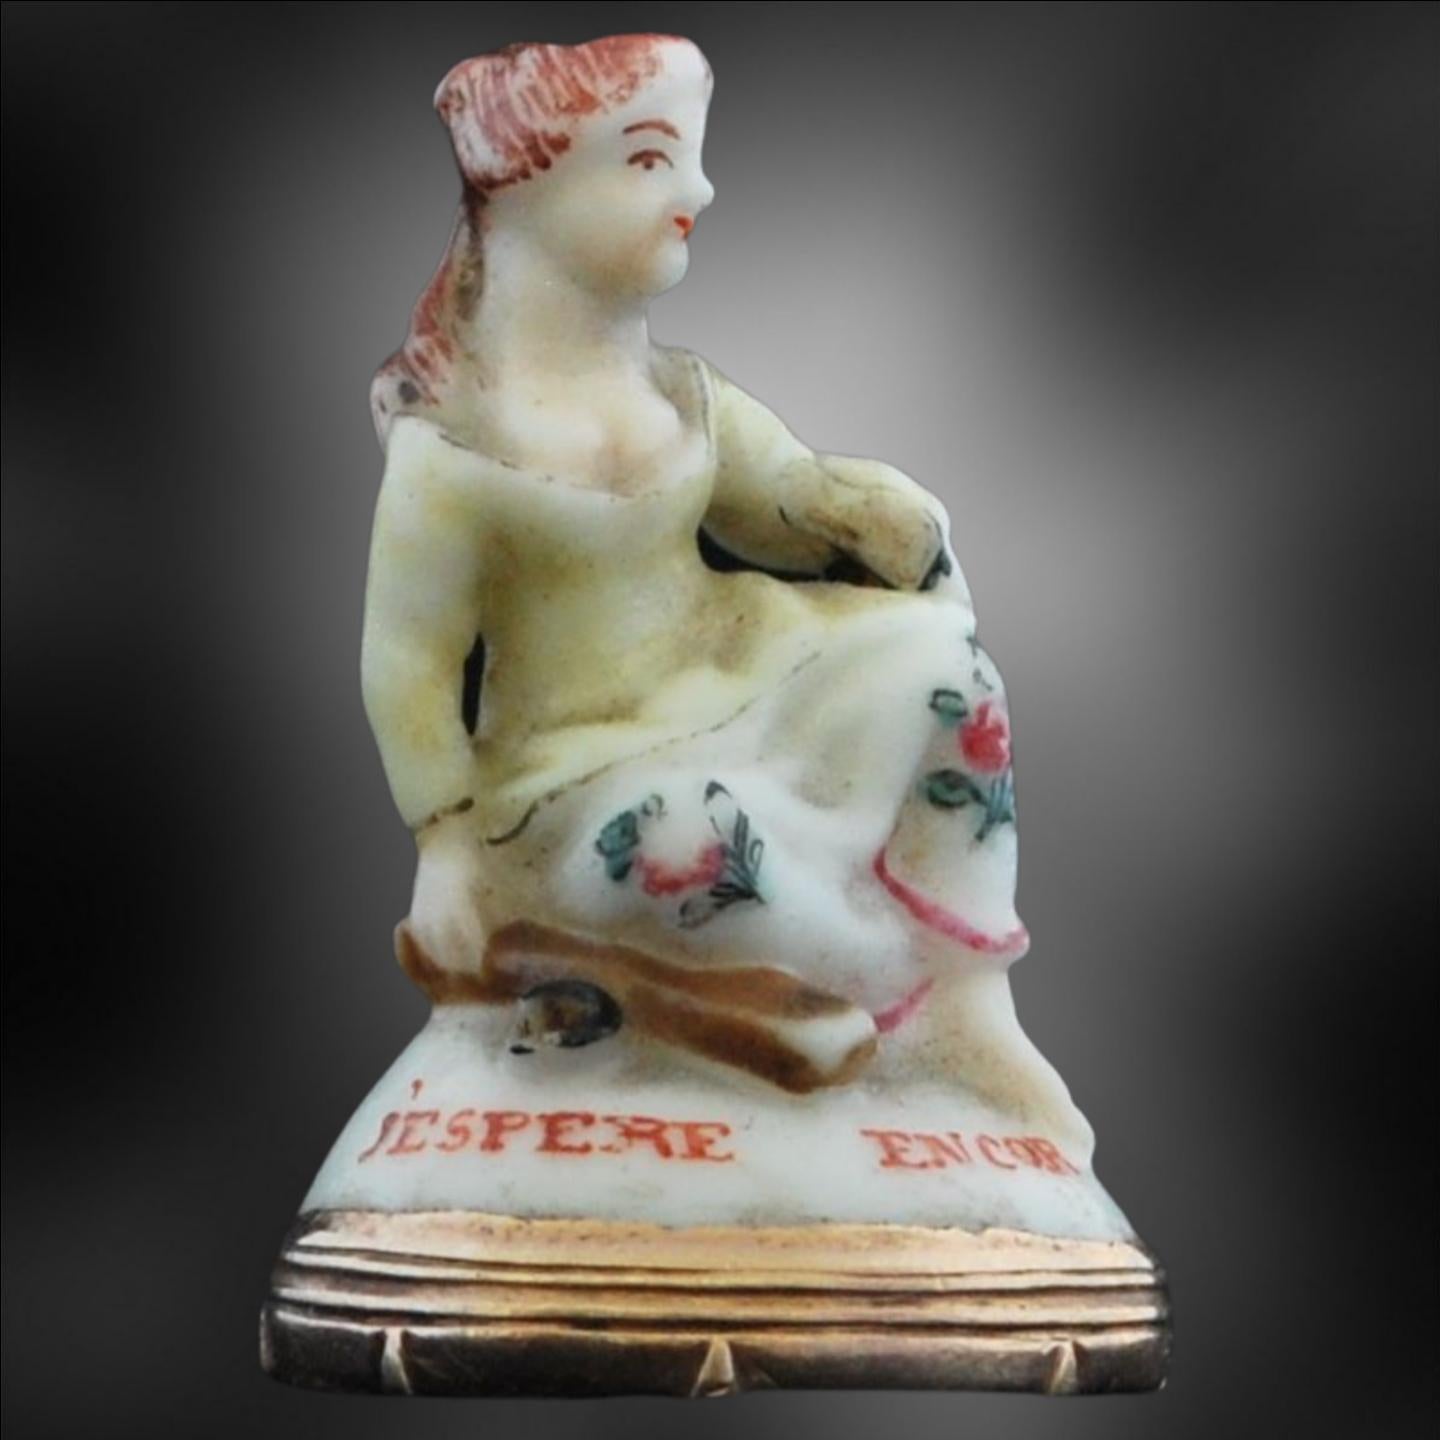 A delightul porcelain seal, depicting a young lady, seated on a mound. It is painted with the motto J'ESPRE ENCORE, or I Still Hope. No doubt this was intended as a gift, to be given by a young man to his sweetheart as a token of his love. 

The